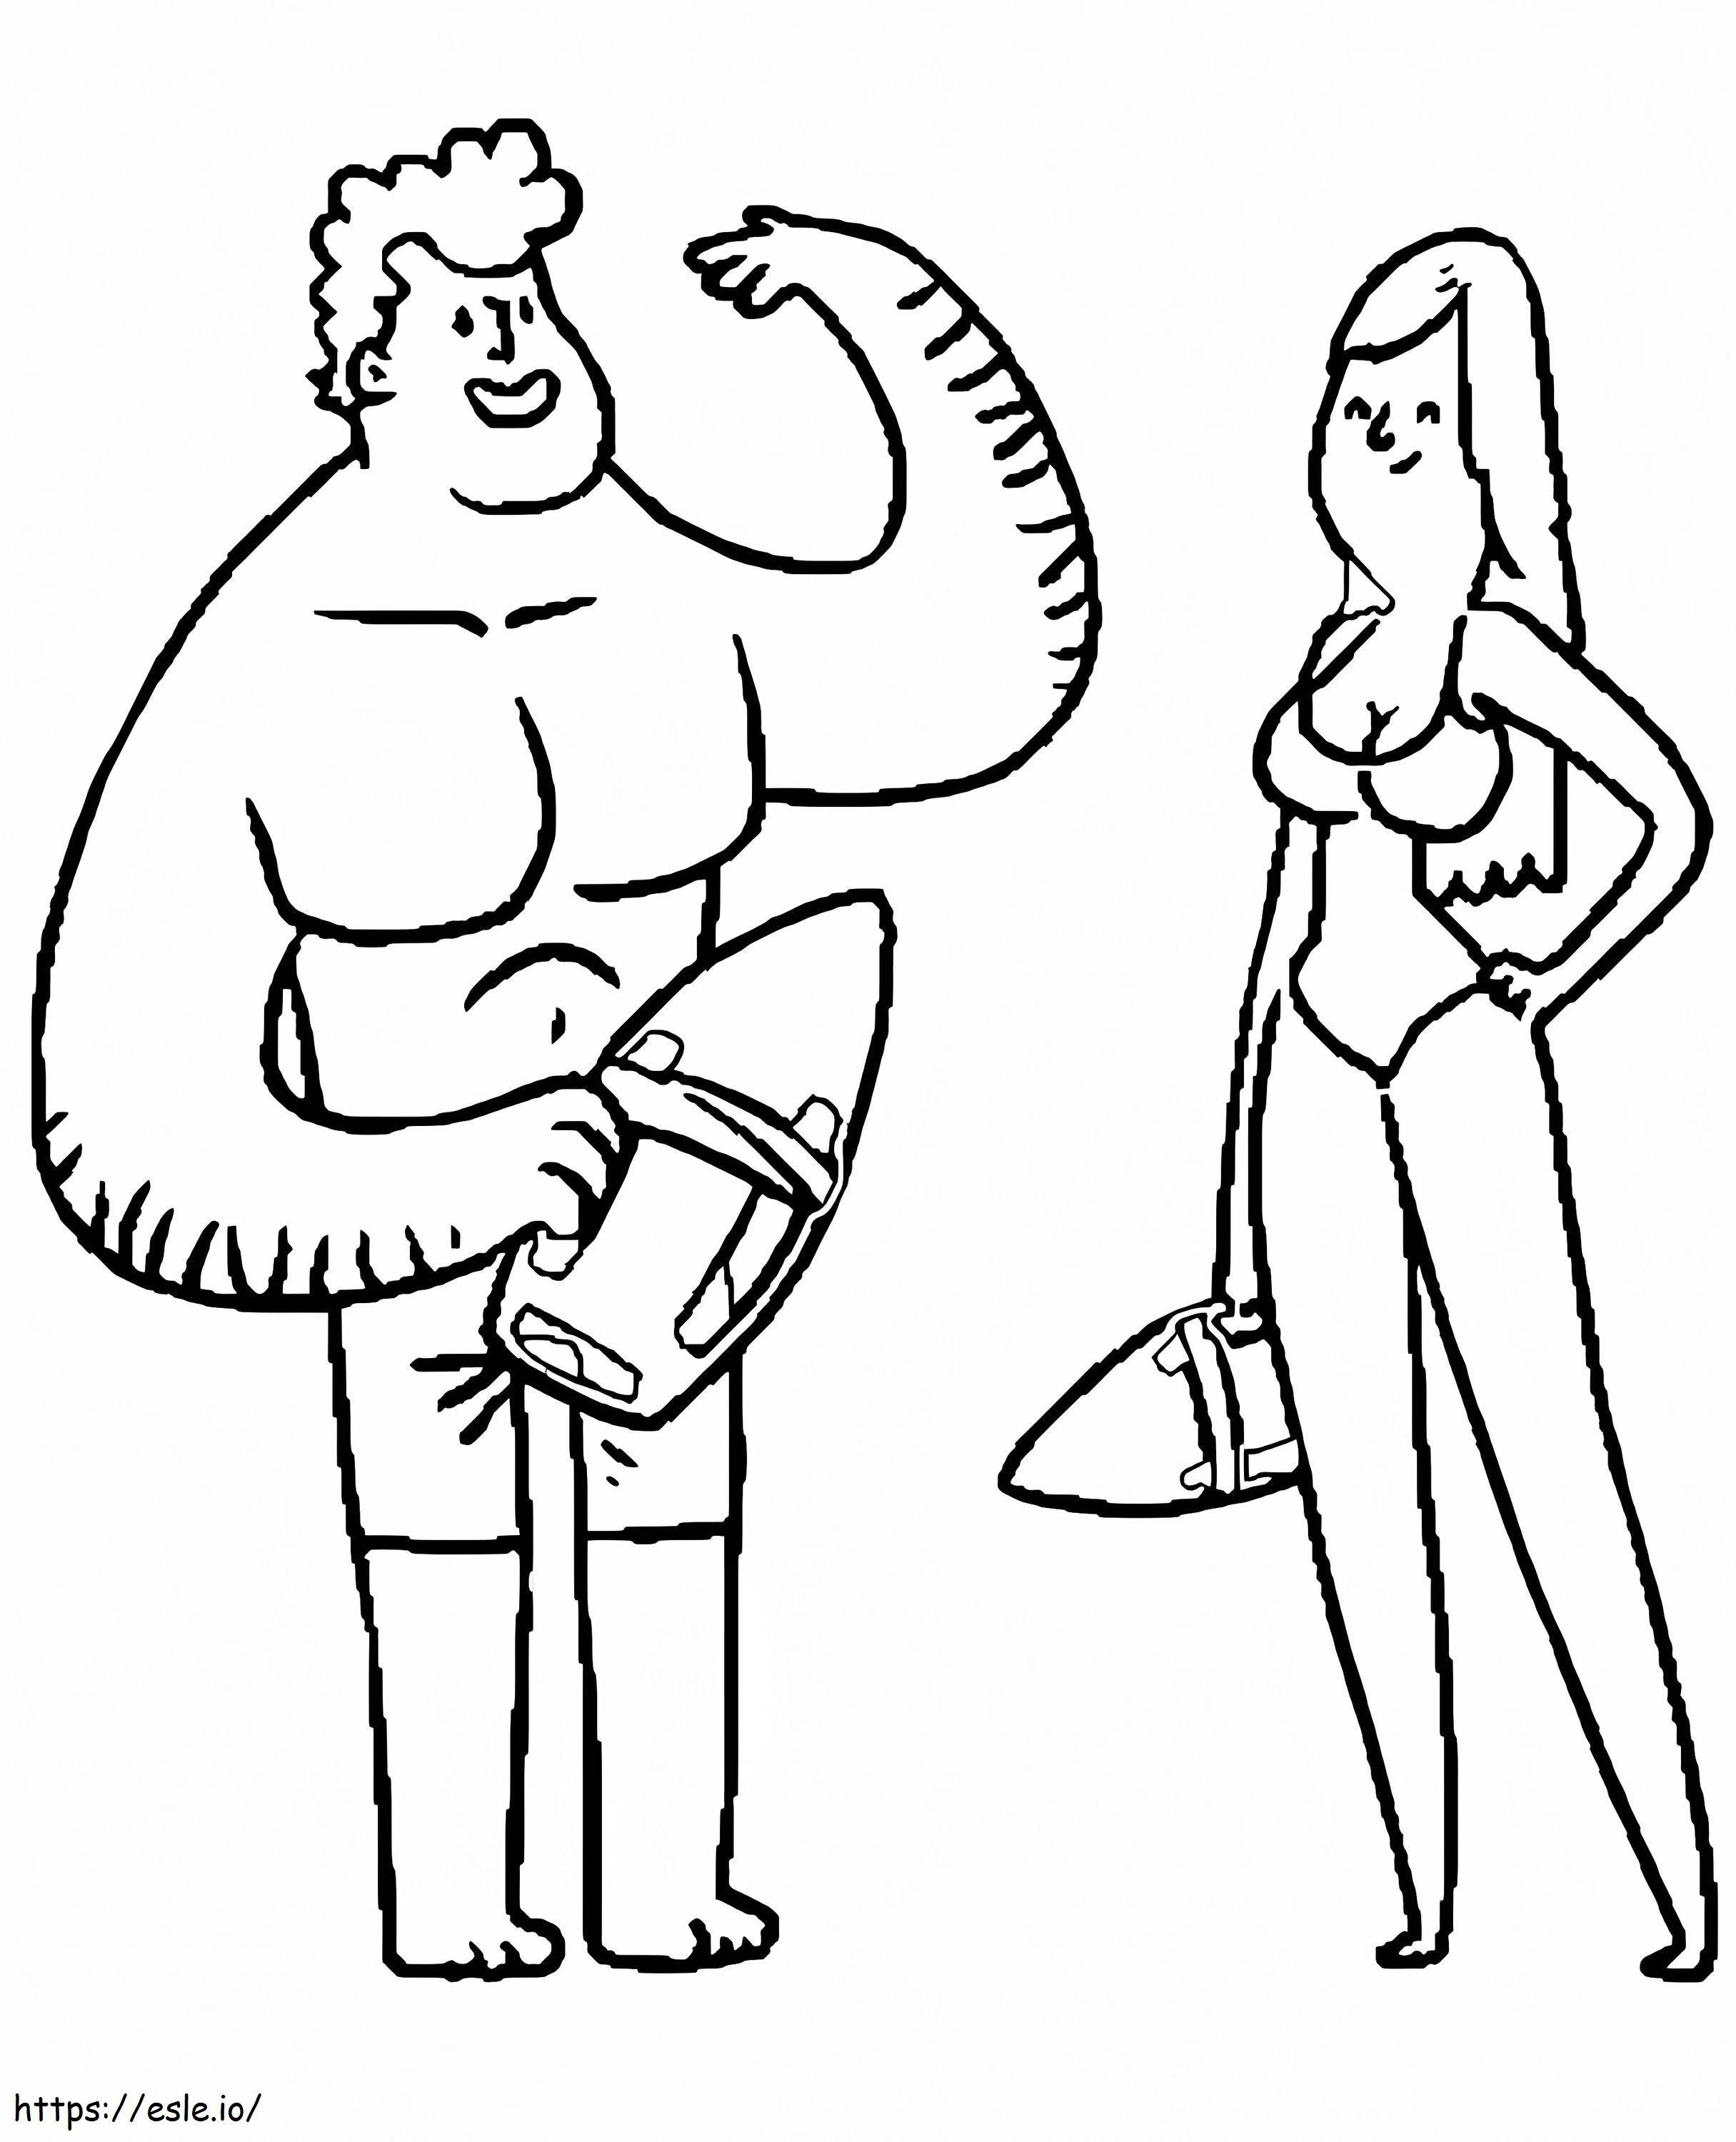 Lifeguards coloring page